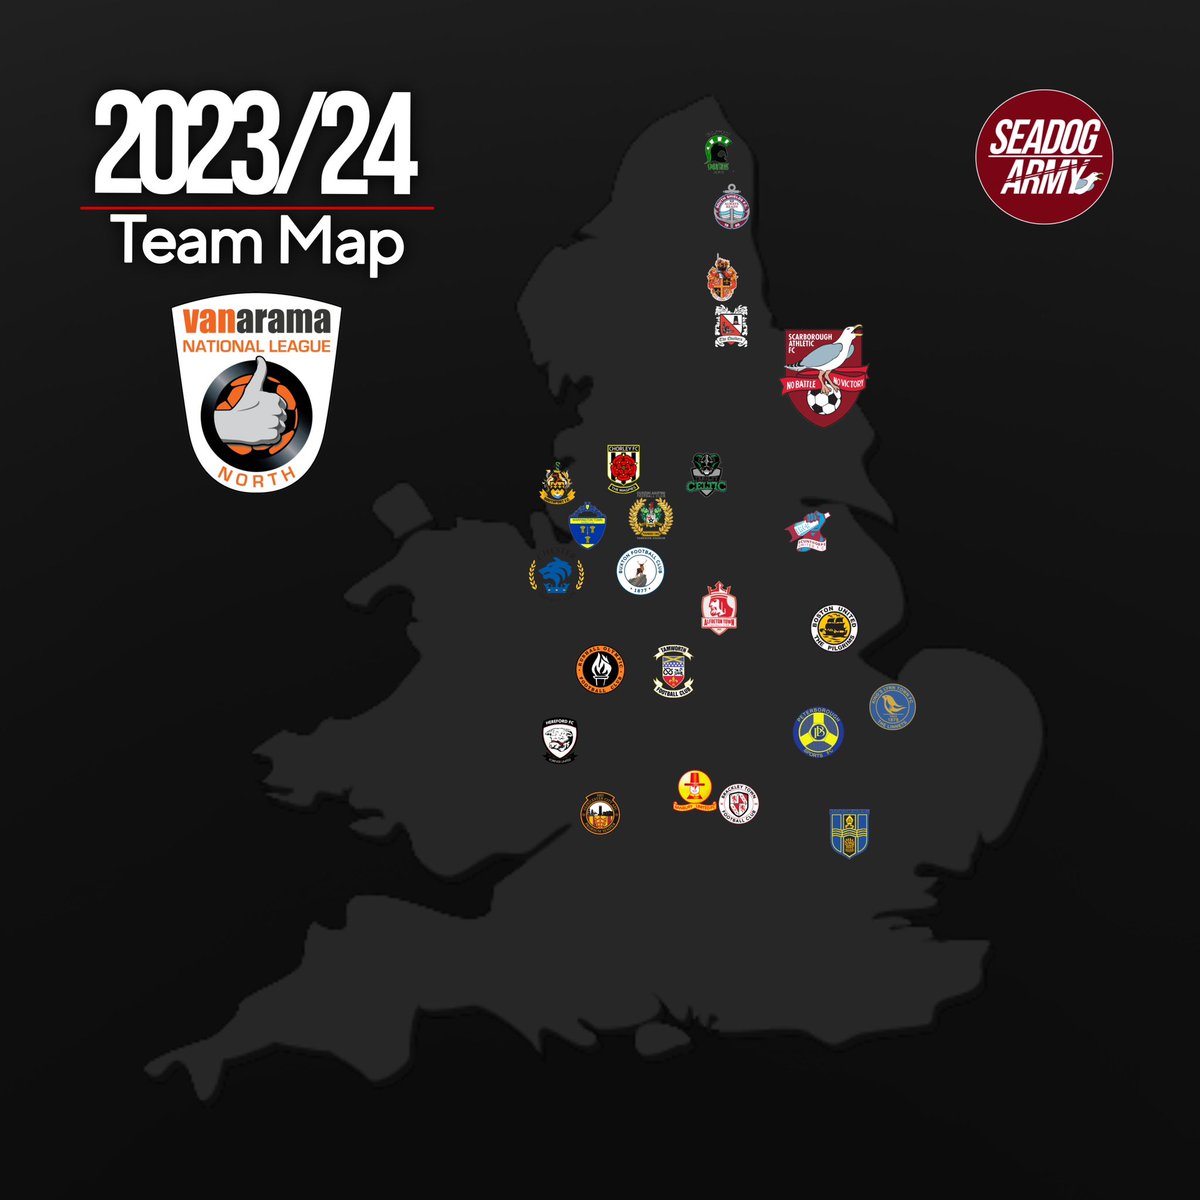 #NationalLeagueNorth team map!

Some huge trips here - including the controversial 226.3 mile trip to #BishopsStortford for the Boro. 

But an extraordinary trip for northernly #BlythSpartans, 270.8 miles between the two teams - and 278.5 miles between them and #Hereford.

#SAFC